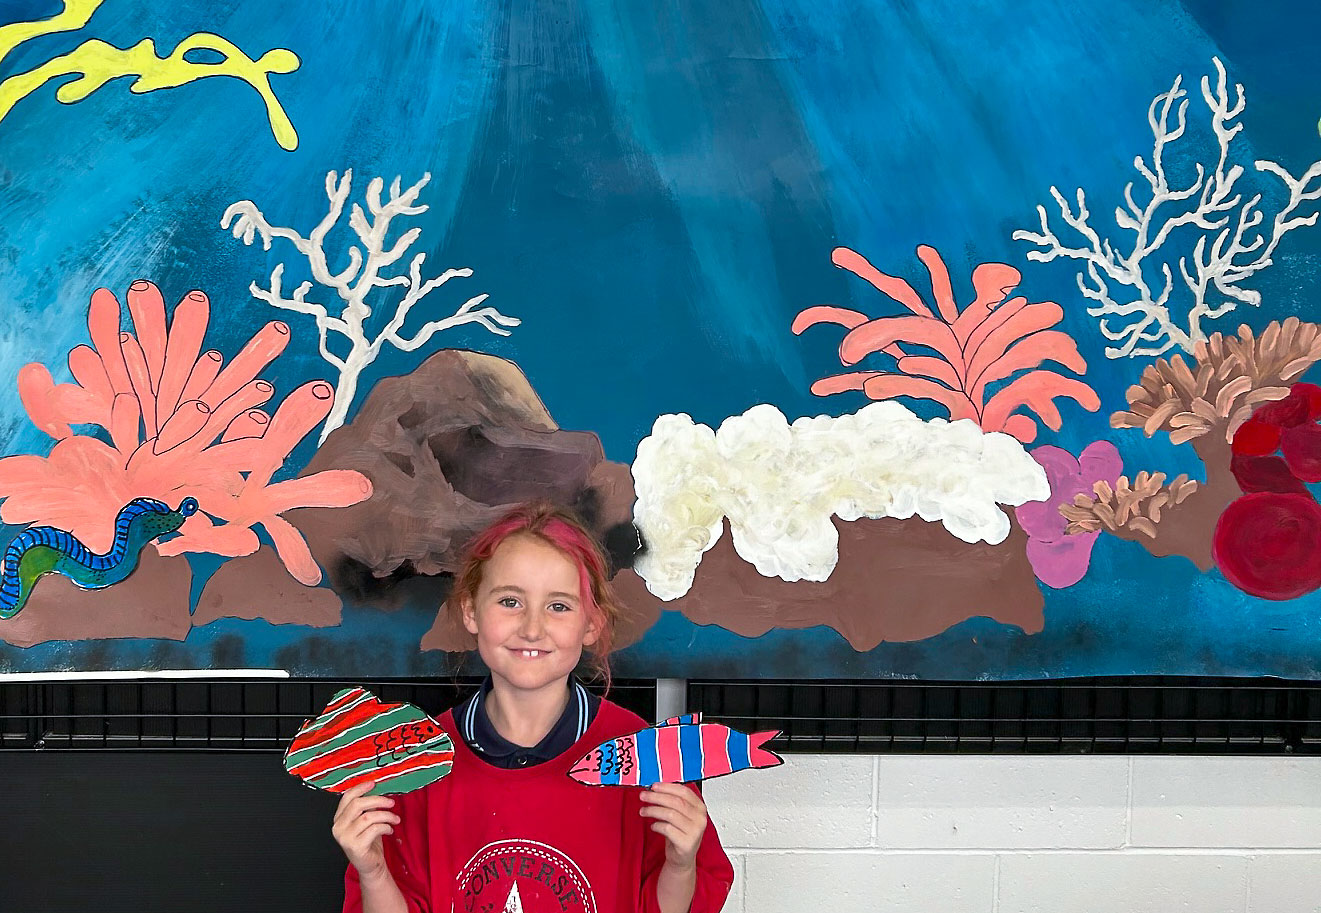 Under the Sea - collaborative installation by the Upstart kids. Young artist holding a brightly coloured fish against an painted undersea backdrop.